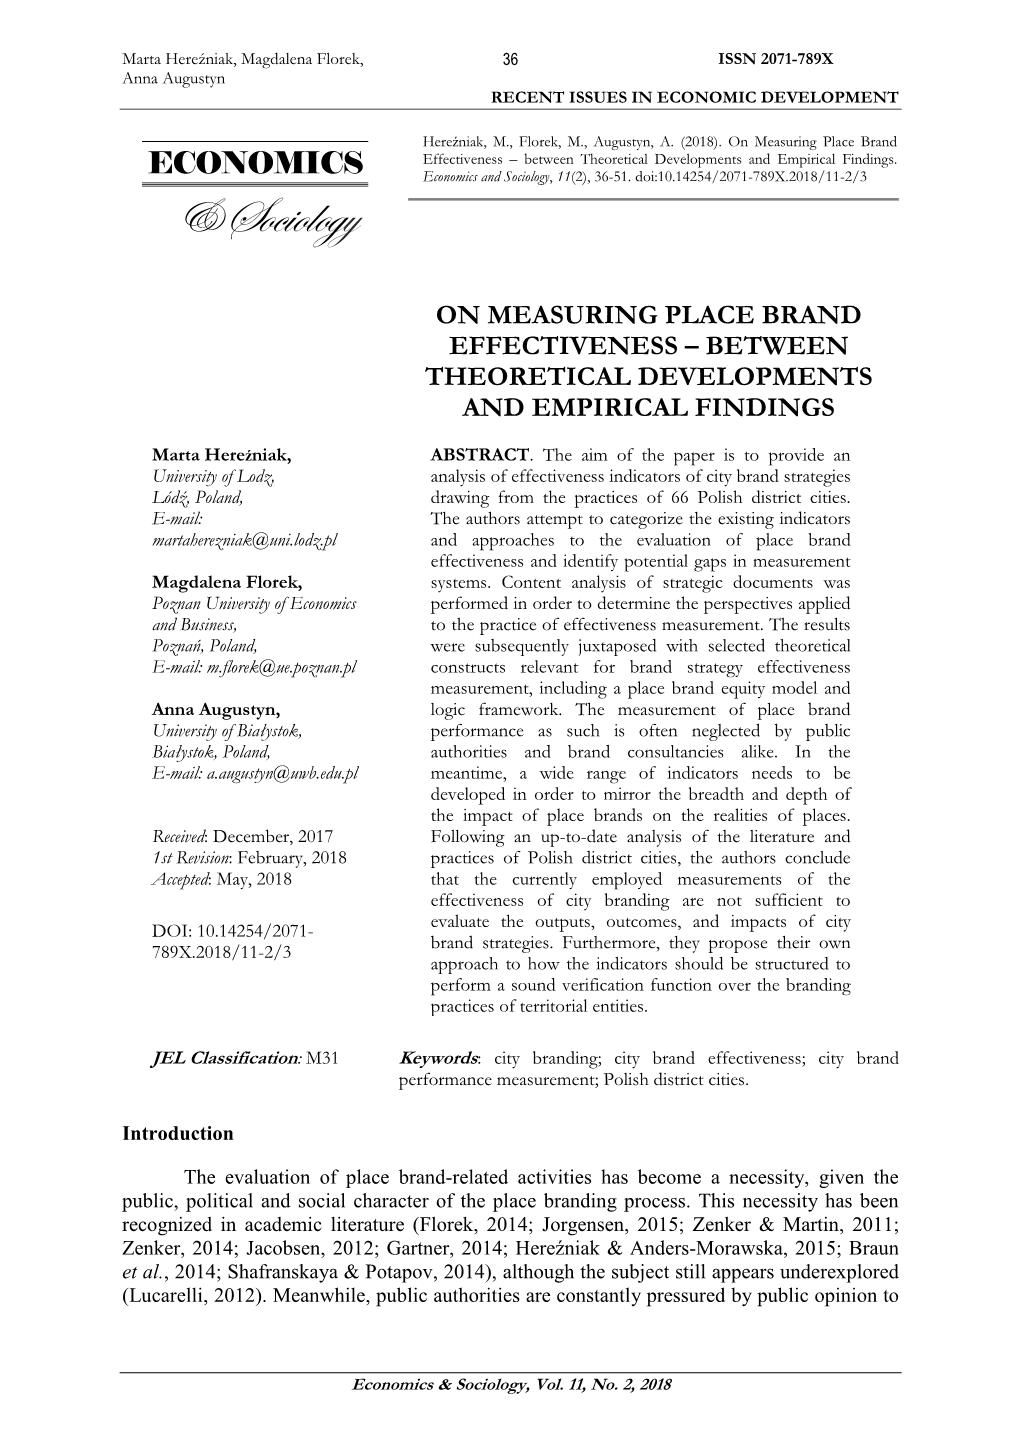 On Measuring Place Brand Effectiveness – Between Theoretical Developments and Empirical Findings